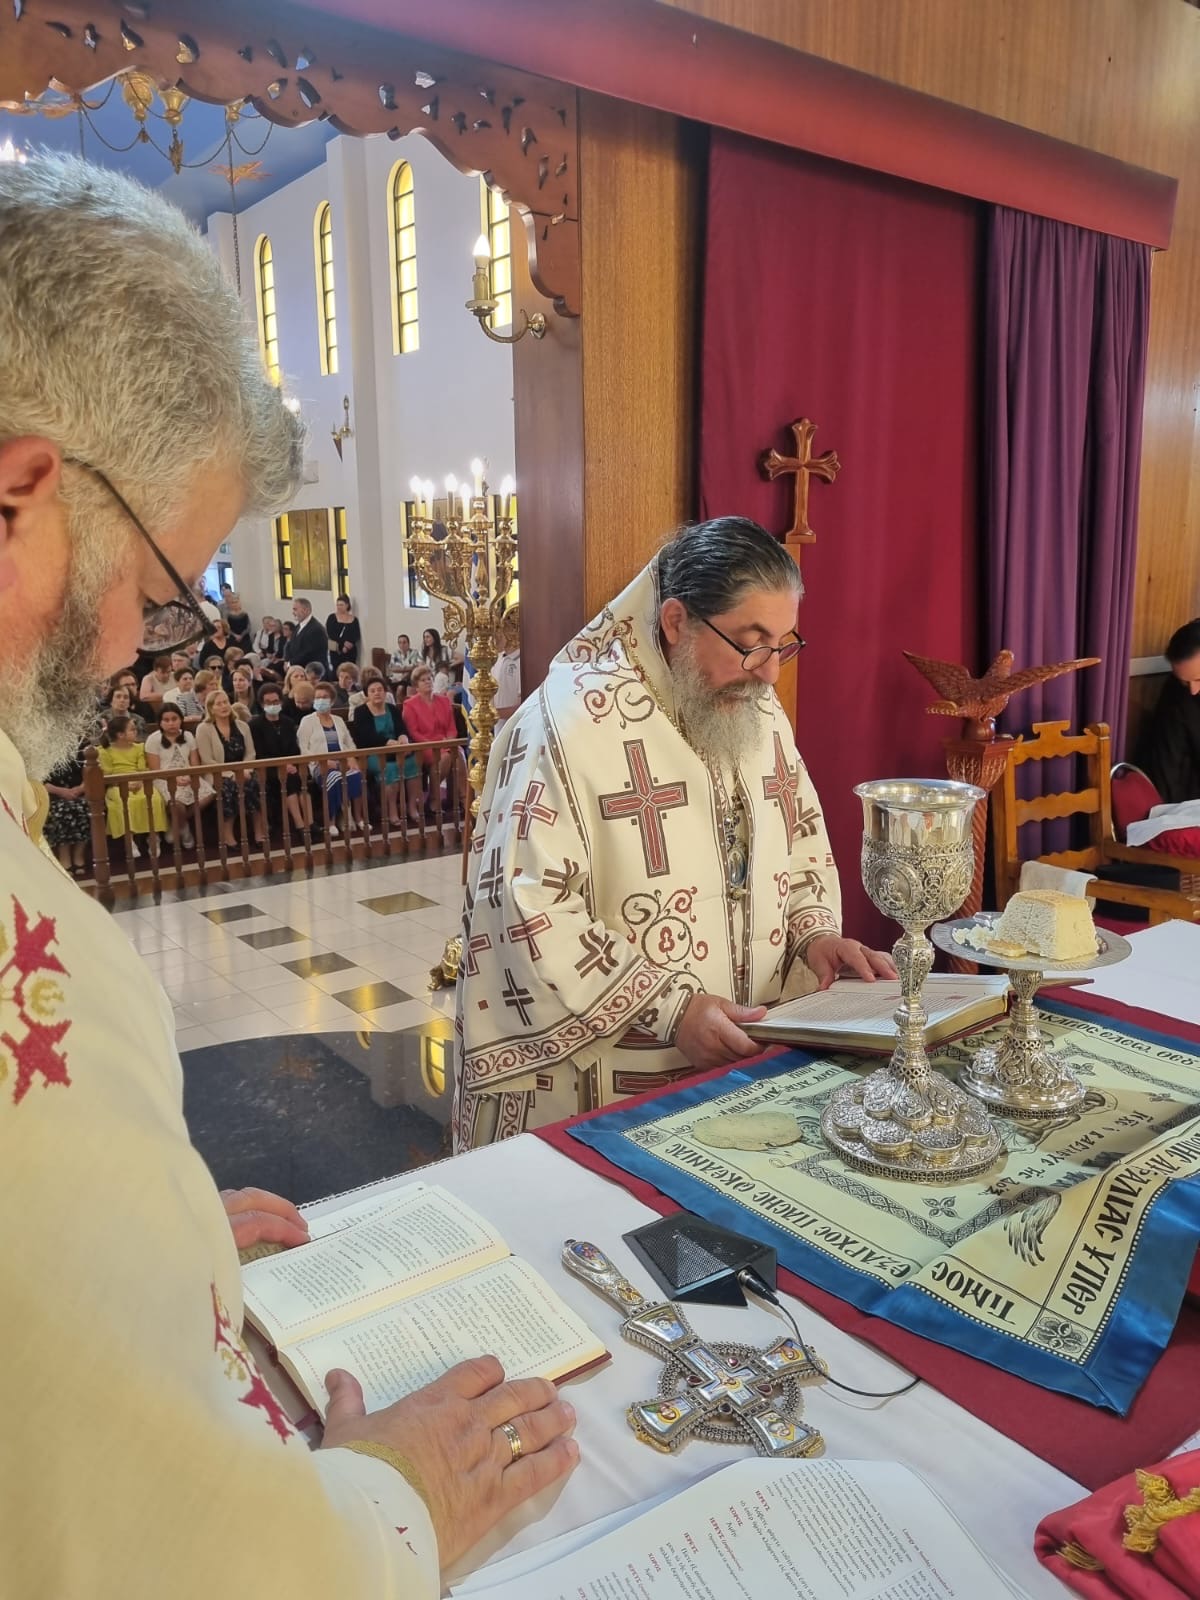 Melbourne: Sunday before the Nativity of Christ at the Church of Saint Andrew, Forest Hill